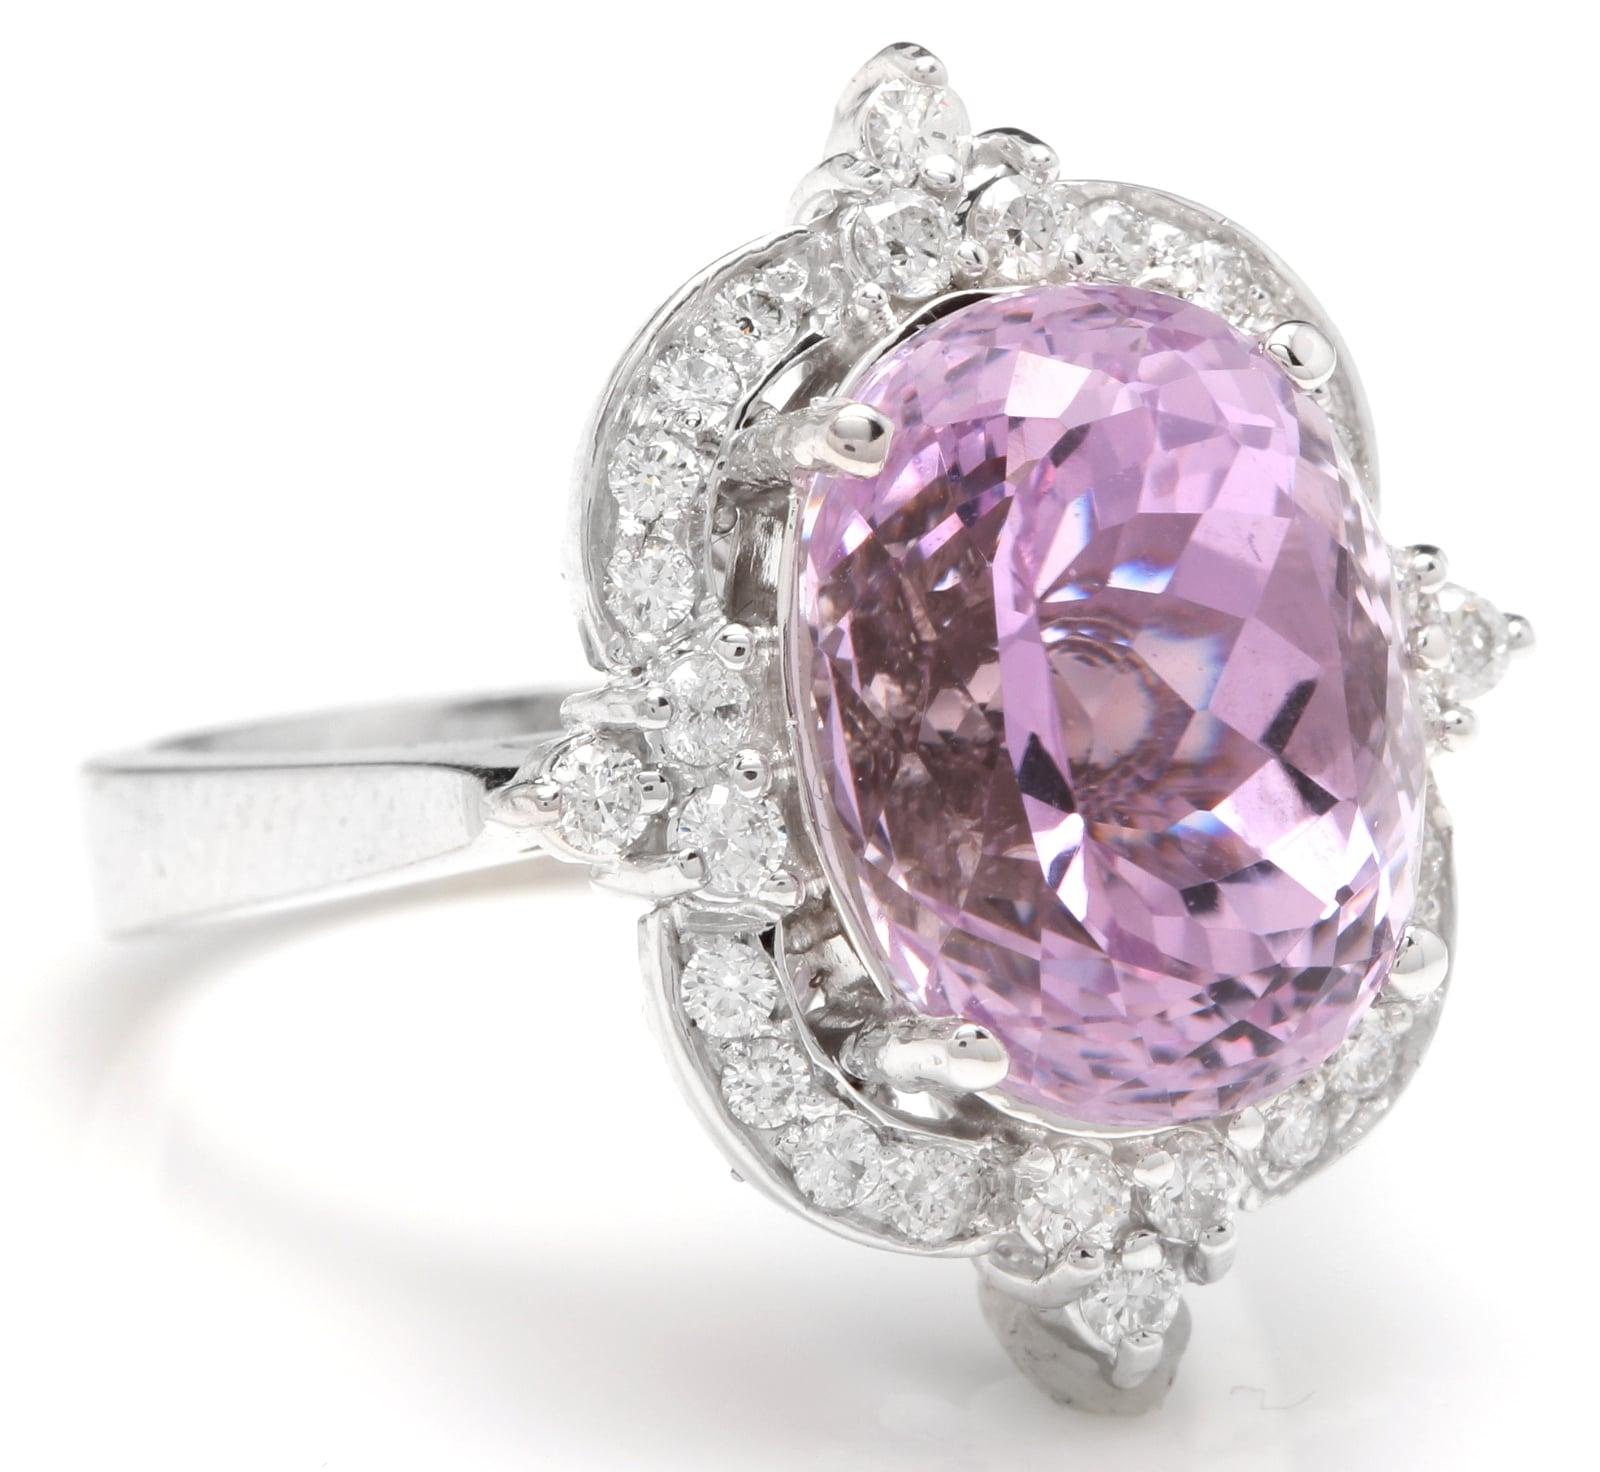 8.15 Carats Natural Kunzite and Diamond 14K Solid White Gold Ring

Suggested Replacement Value: $6,500.00

Total Natural Oval Cut Kunzite Weights: 7.50 Carats 

Kunzite Measures: Approx.  13.00 x 10.00mm

Natural Round Diamonds Weight: 0.65 Carats